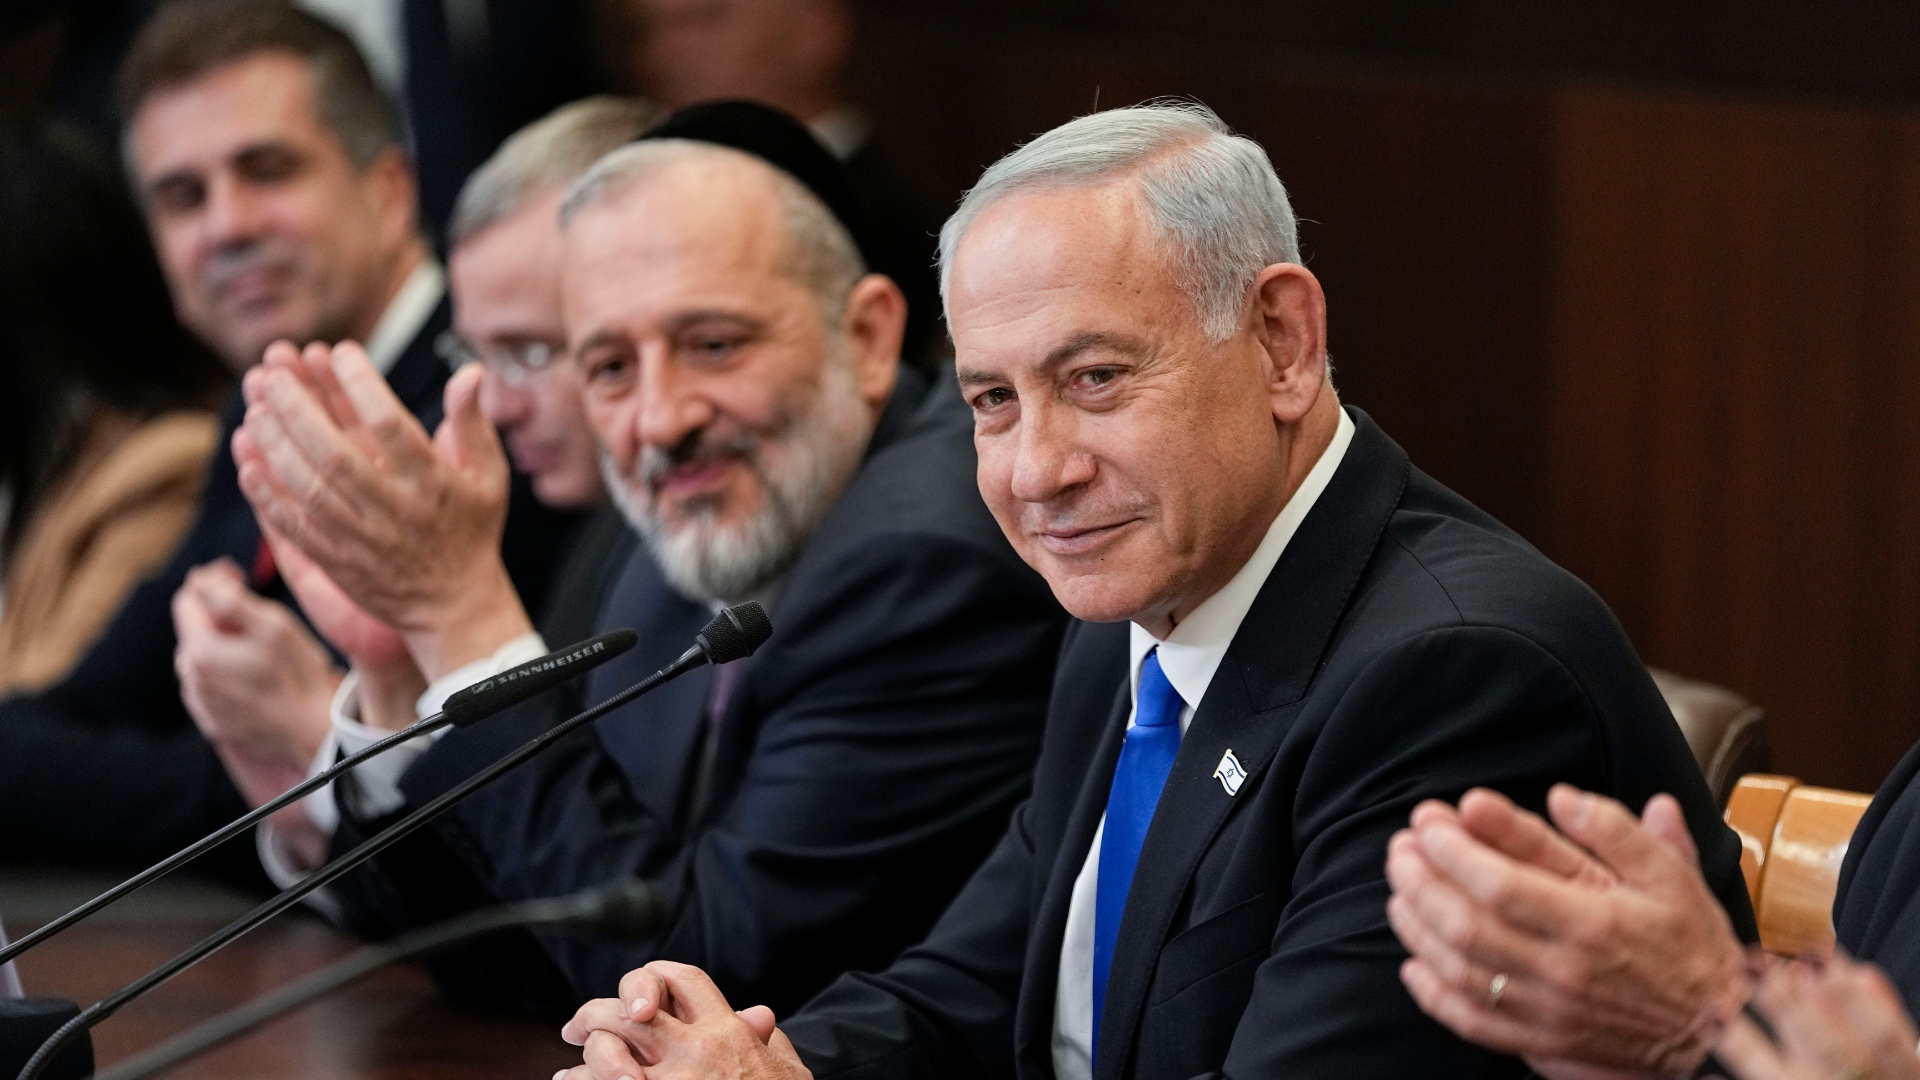 Why is the US worried about Israel’s new government?